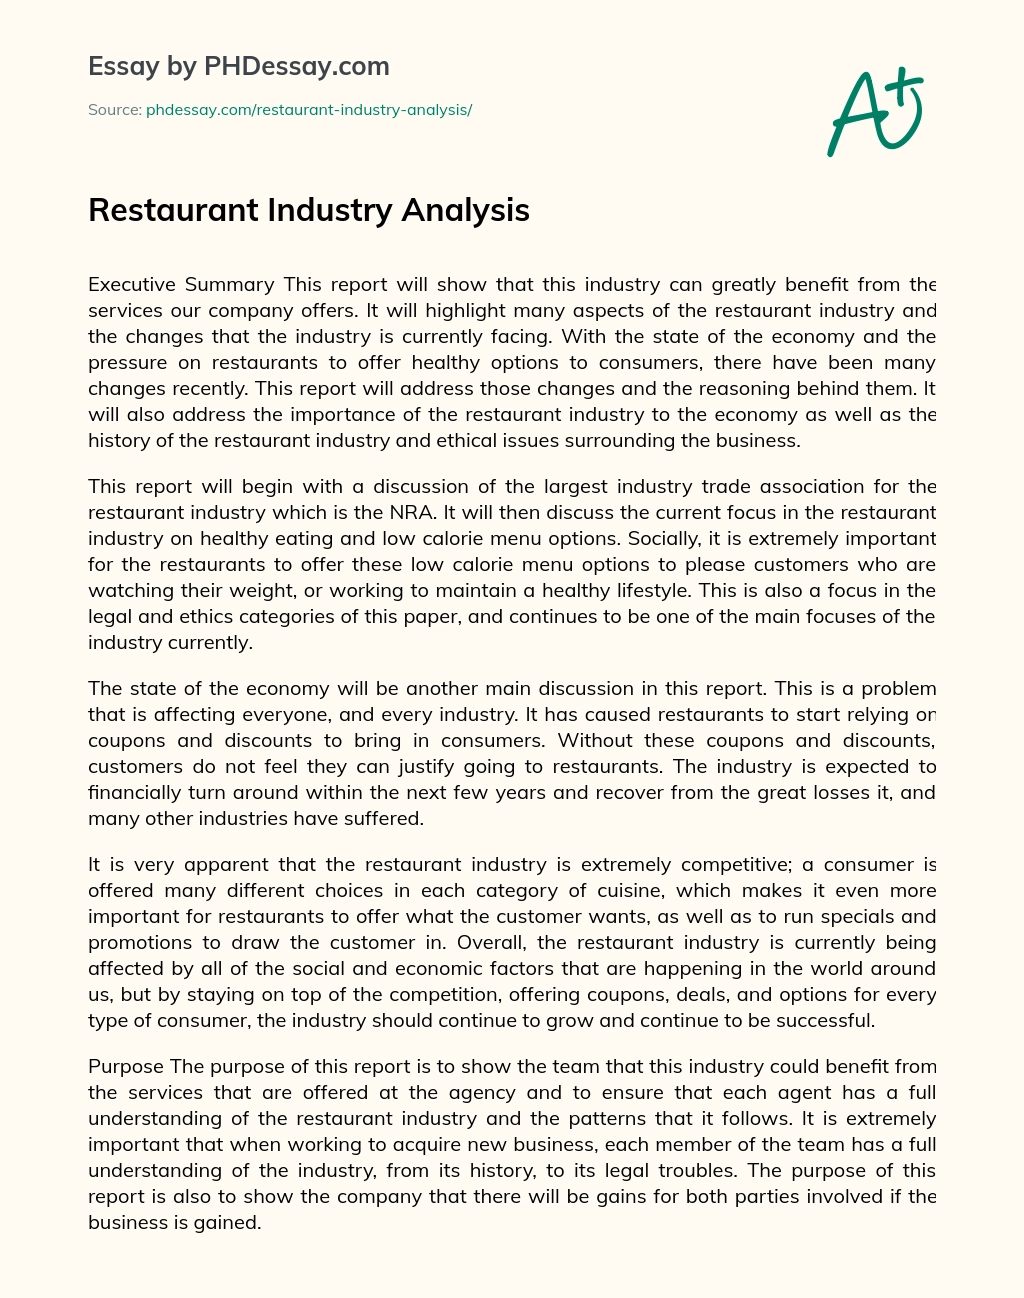 Реферат: Pizza Industry Essay Research Paper THE RESTAURANT